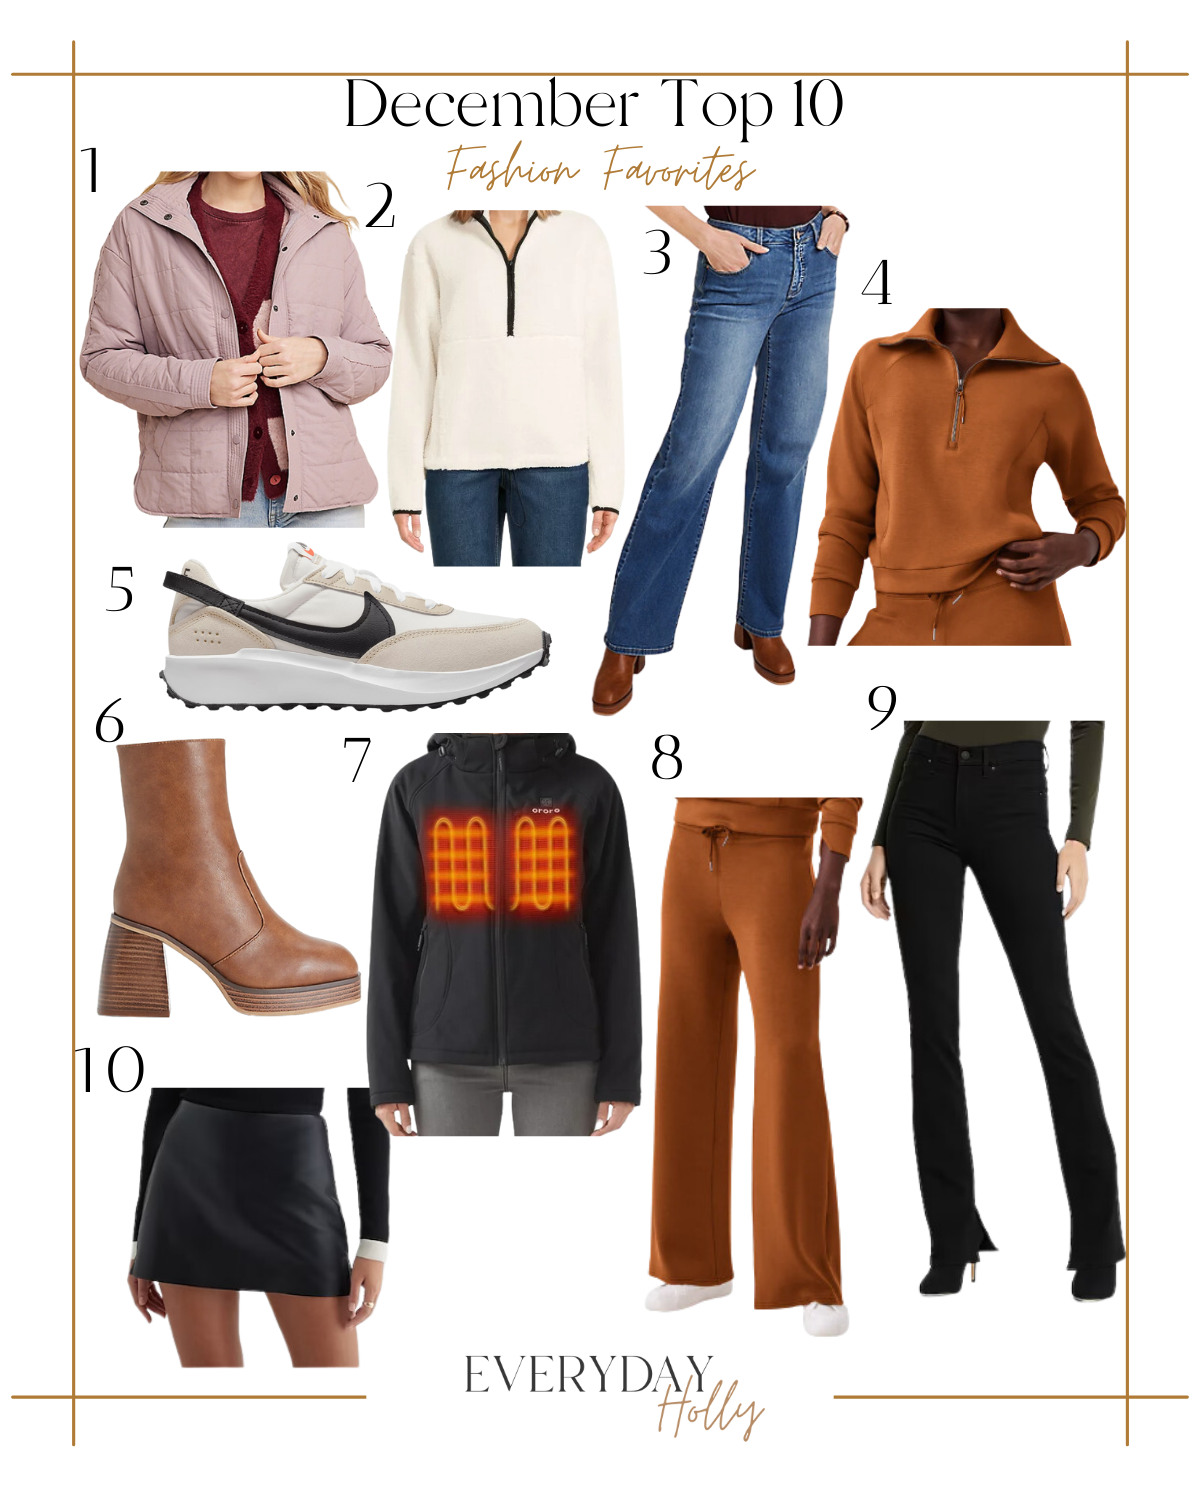 Hottest best sellers from december | #hottest #best #sellers #december #2023 #topseller #fashion #jacket #denim #sweater #halfzip #style #boots #booties #sneakers #neutral #skort #fauxleather